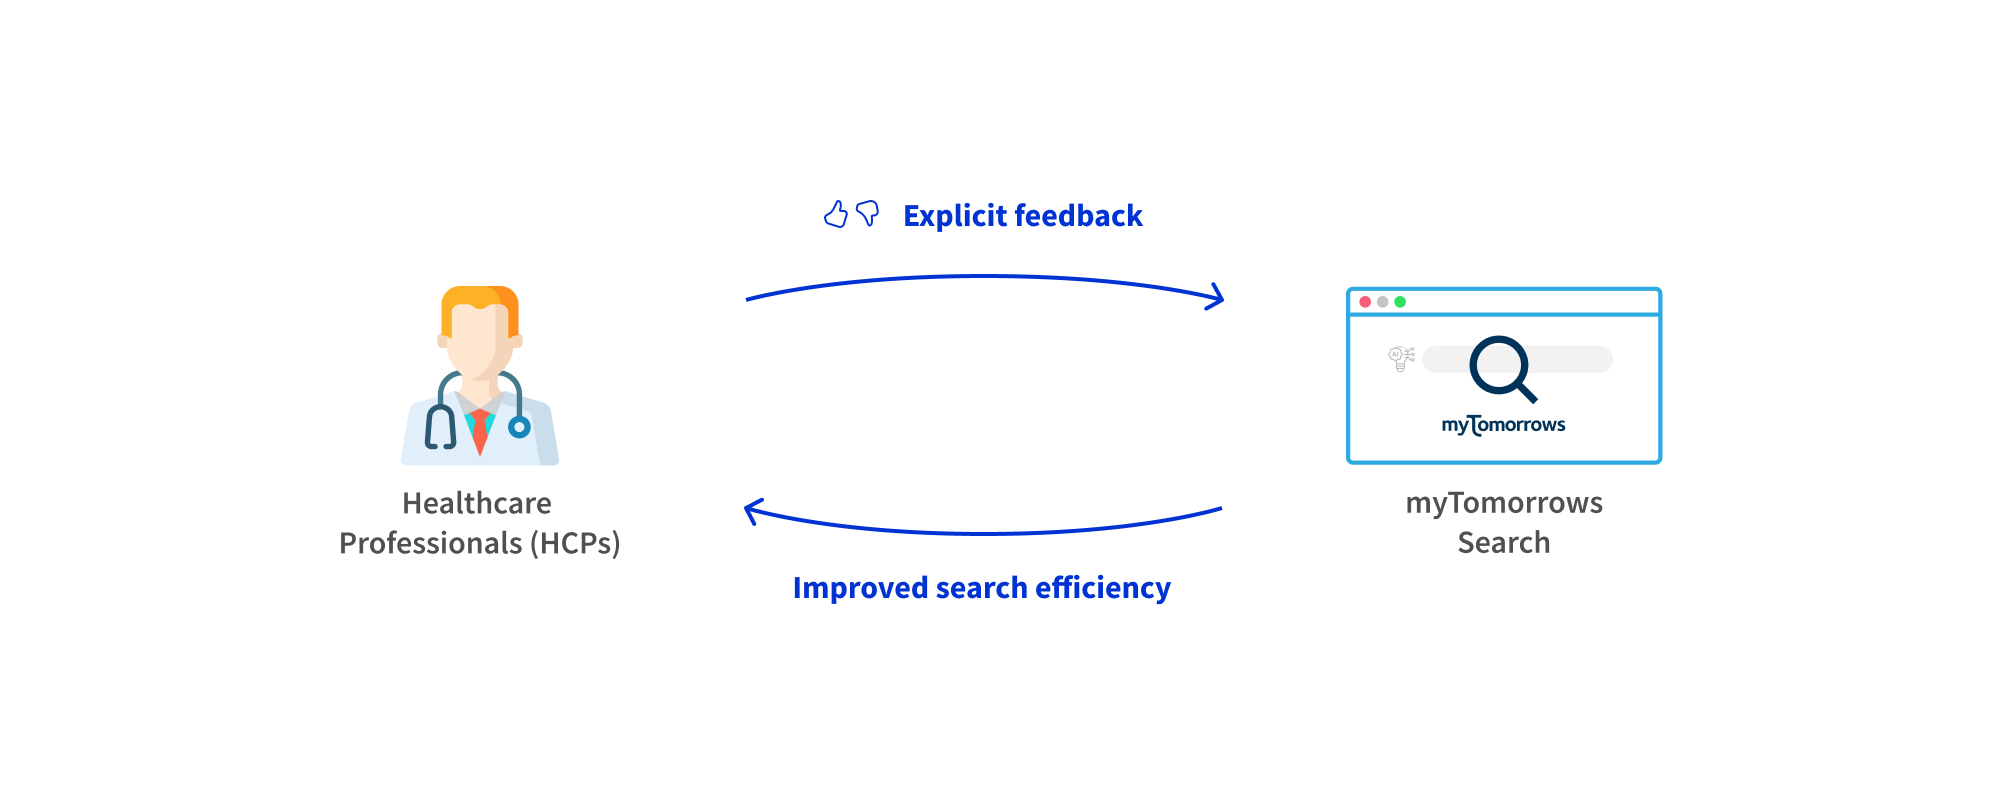 an illustration showing how explicit feedback can contribute